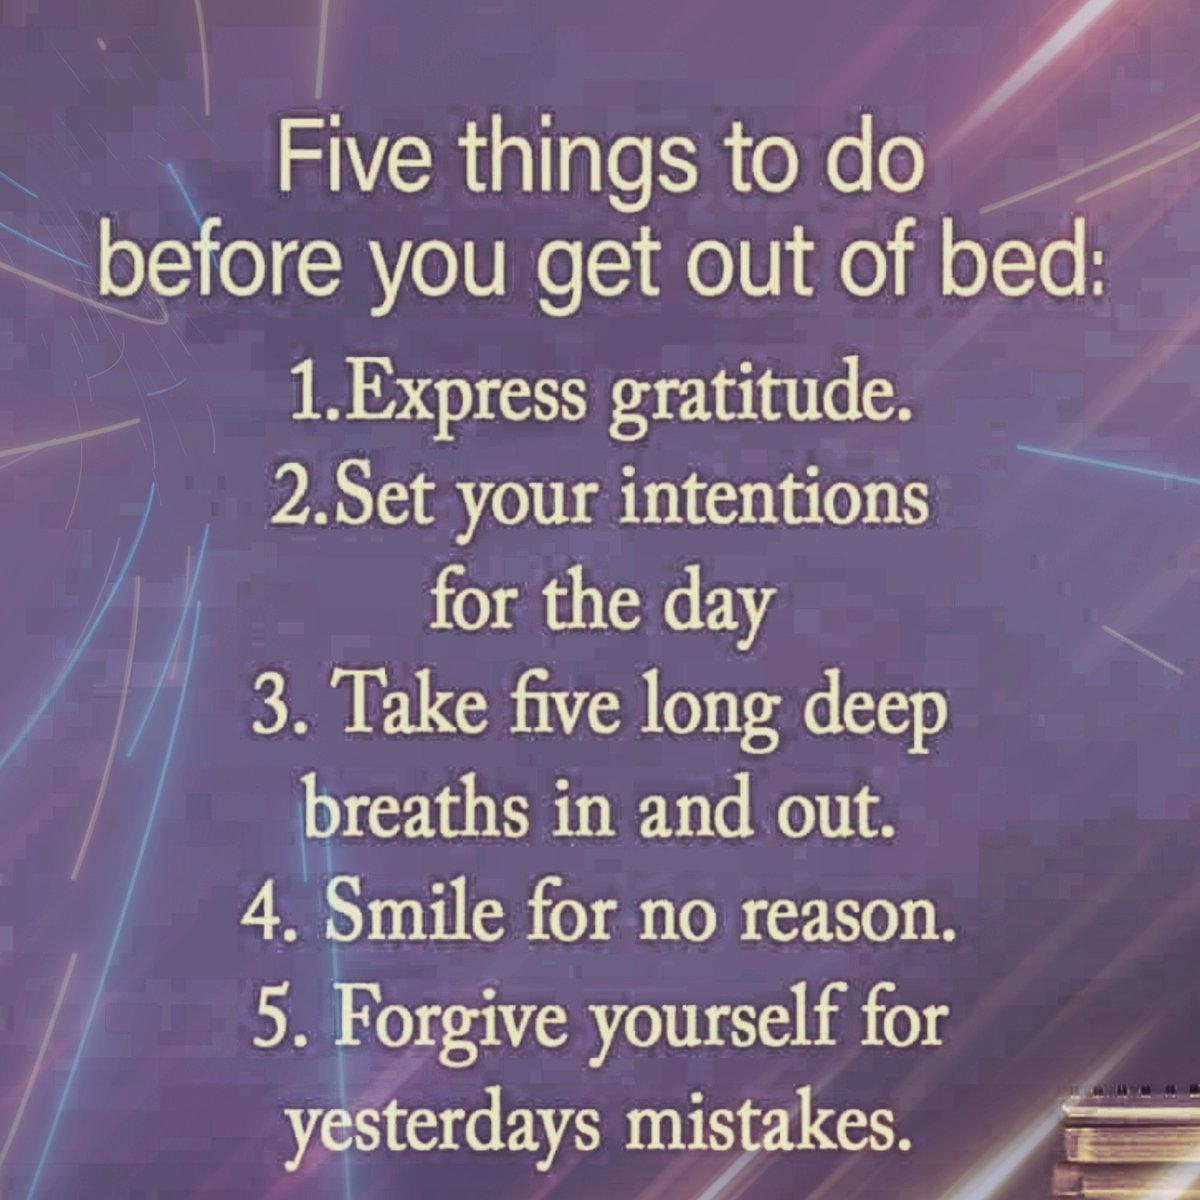 Truth of the day: Begin your day right. #expressgratitude #setintentions #5deepbreaths #smiletoyourself #forgiveyourselfforyesterday #mindfulnesscoach #ChattanoogaSpeaker Connect with REAL Health askmaryellen.com